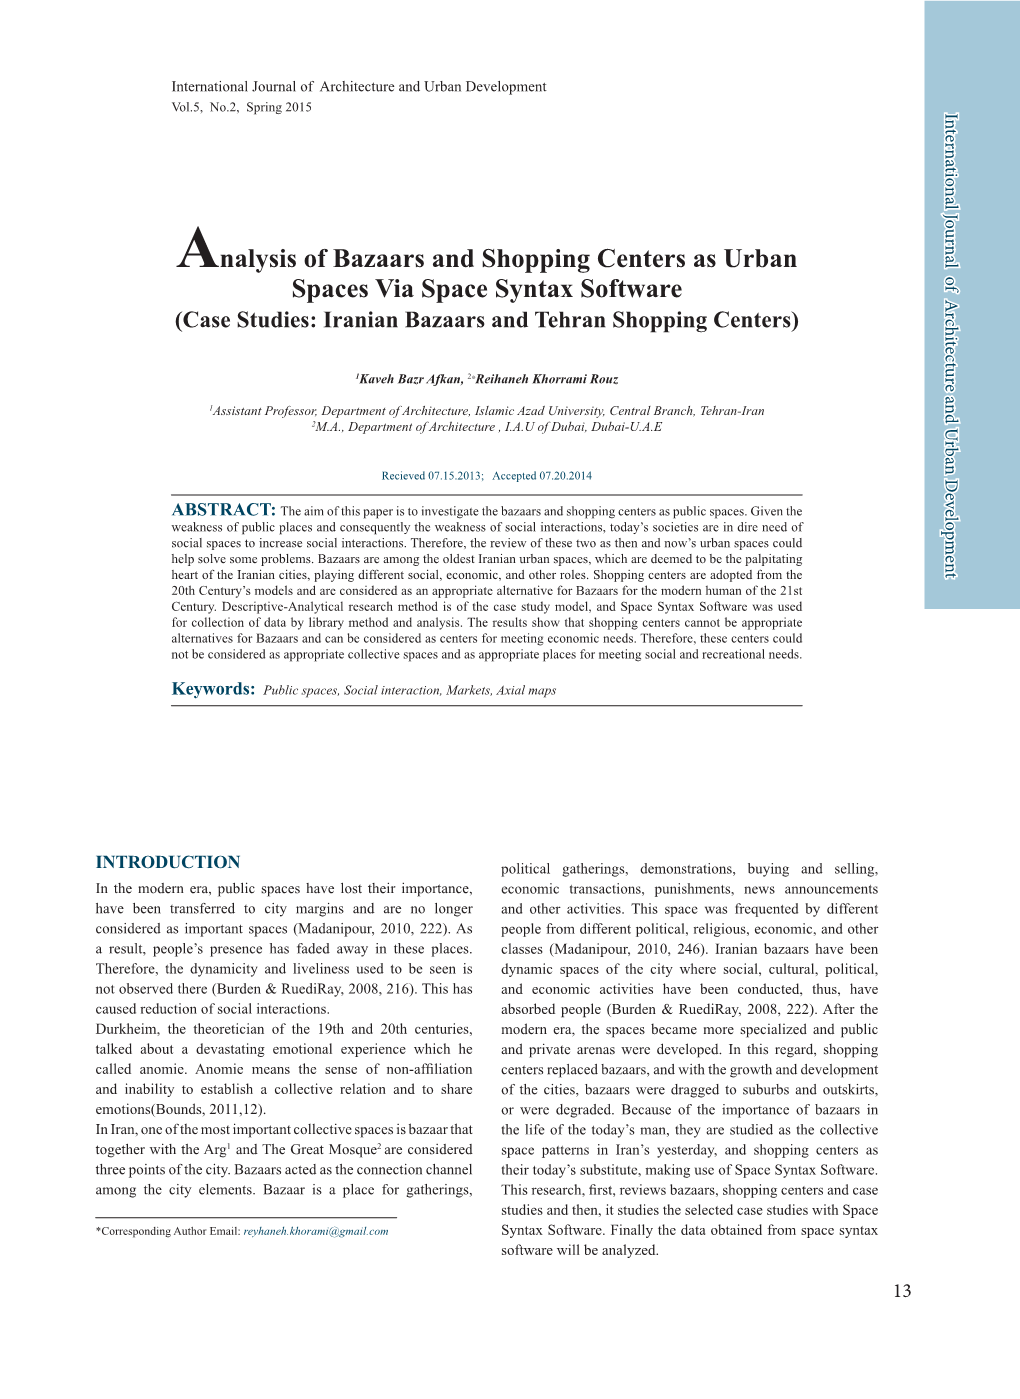 Analysis of Bazaars and Shopping Centers As Urban Spaces Via